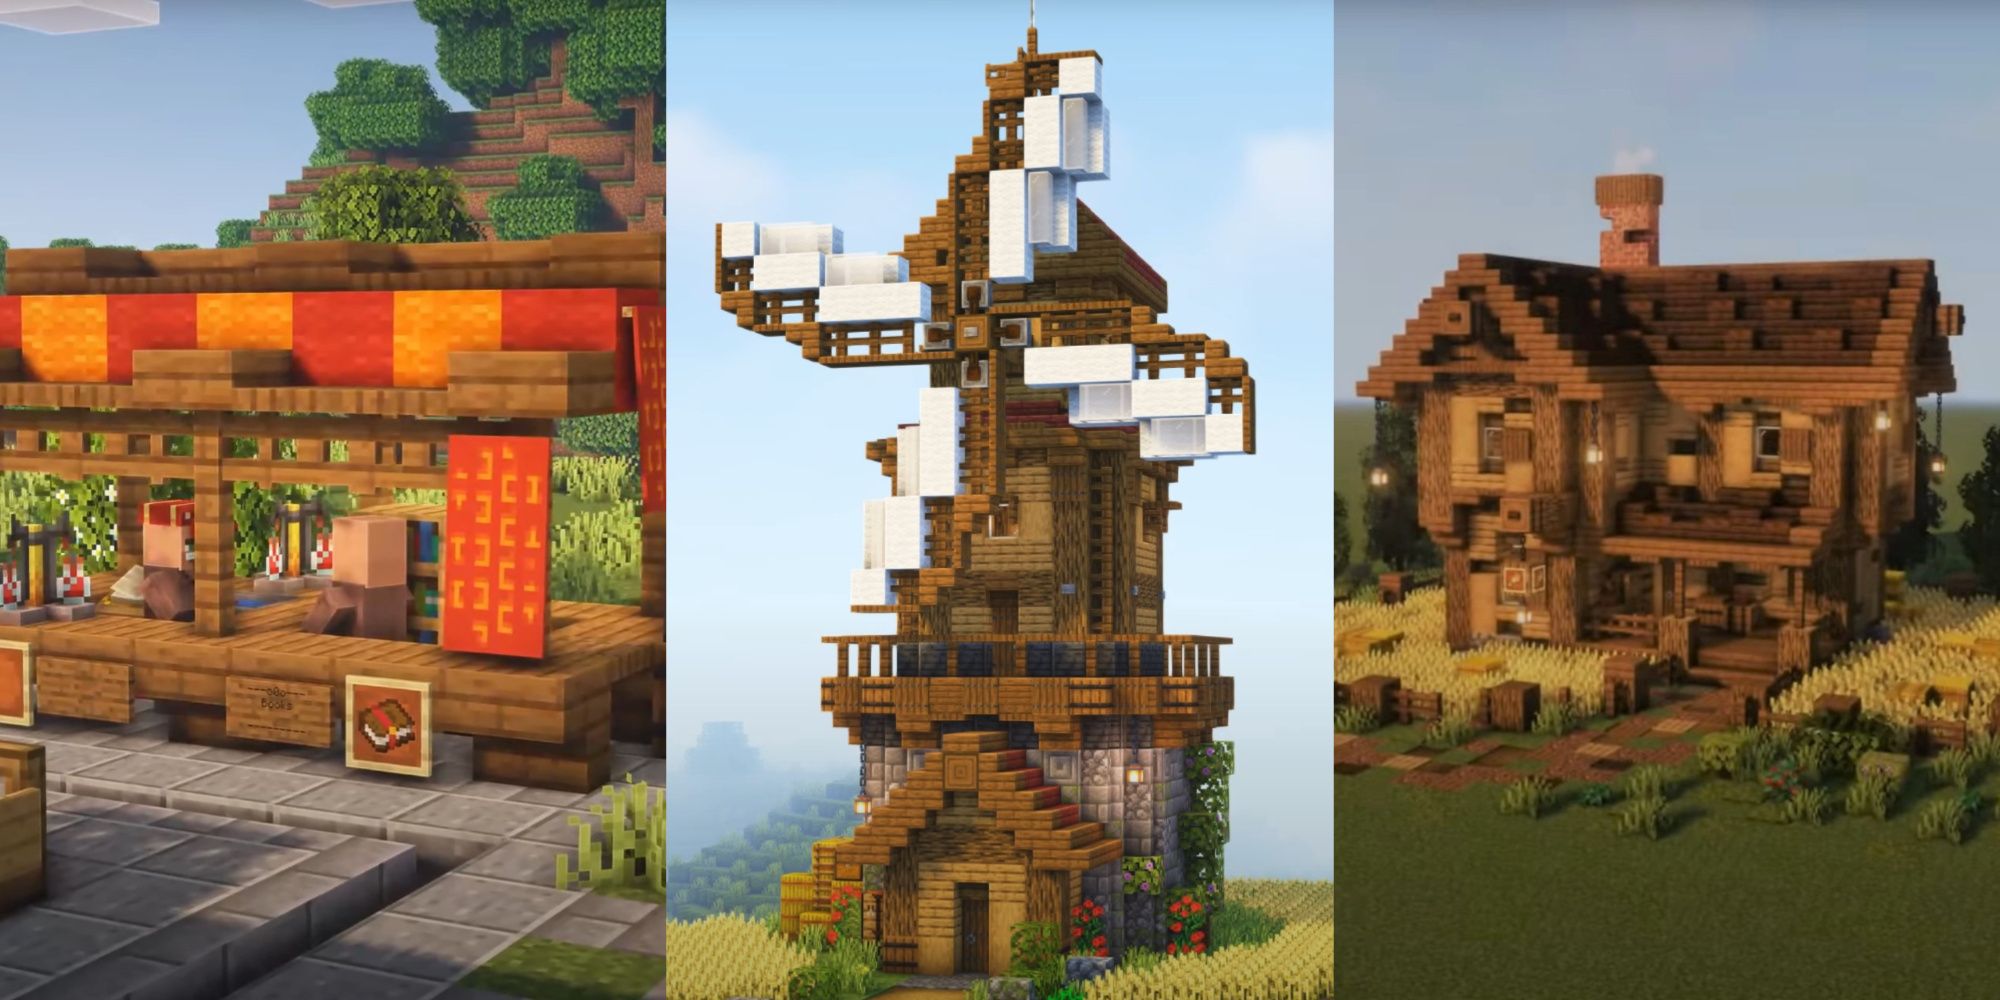 An image from Minecraft of three different Village Build Ideas, a marketplace, a large windmill, and an upgraded farmhouse.